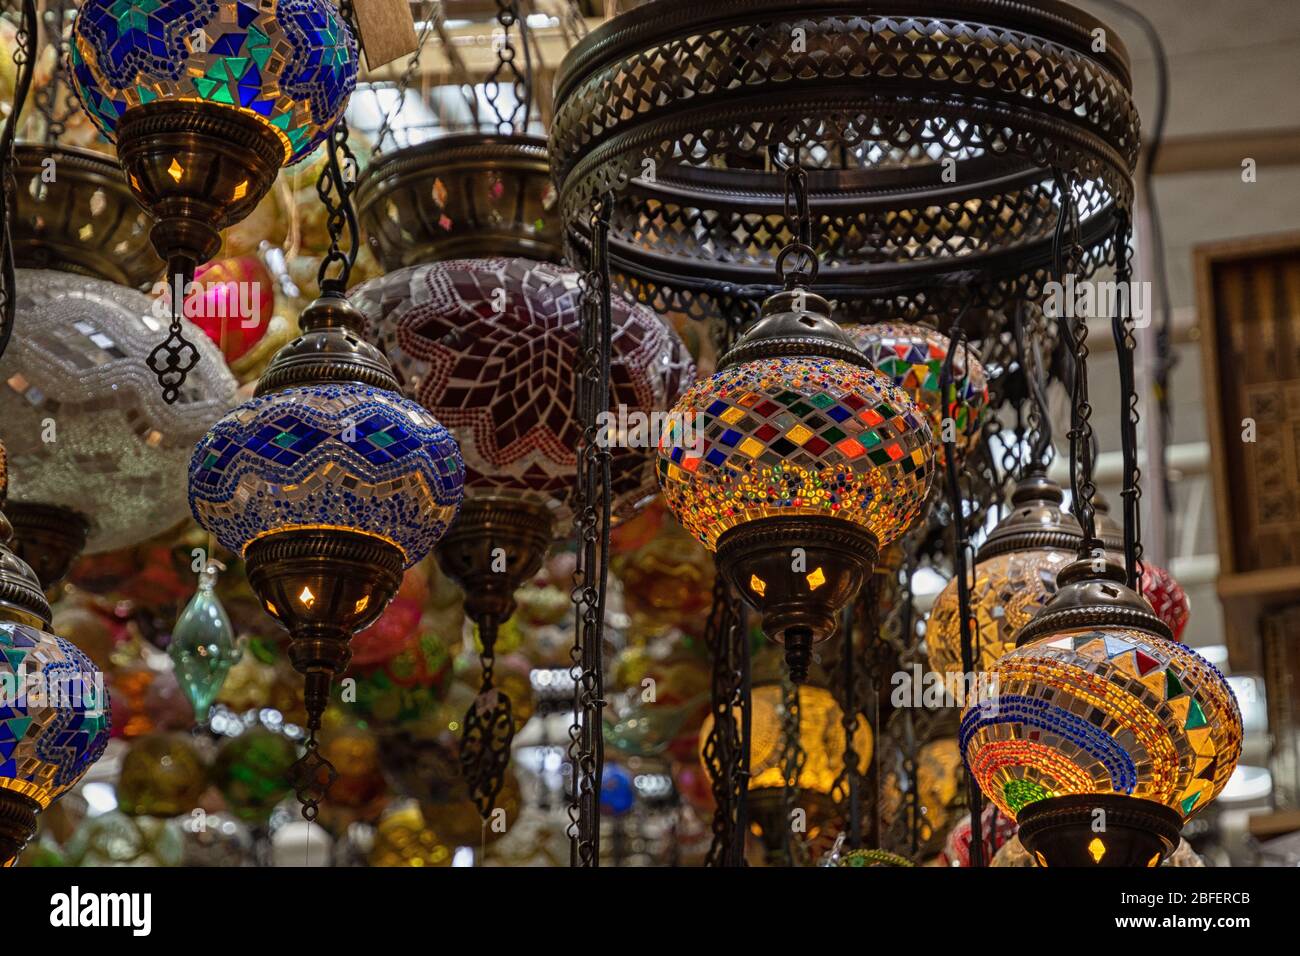 oriental lamps in a market Stock Photo